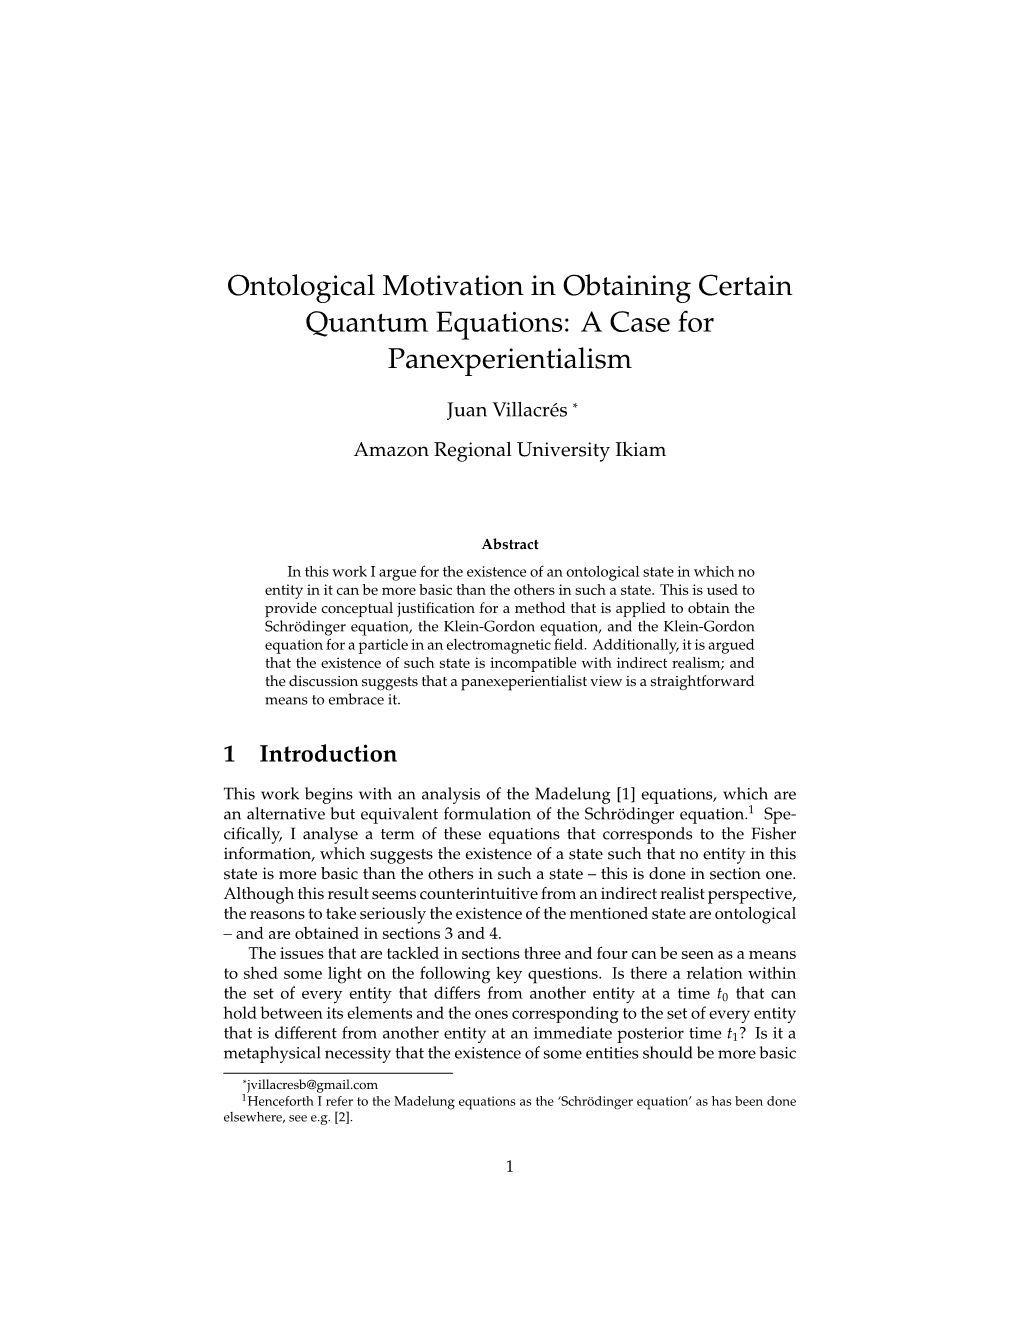 Ontological Motivation in Obtaining Certain Quantum Equations: a Case for Panexperientialism